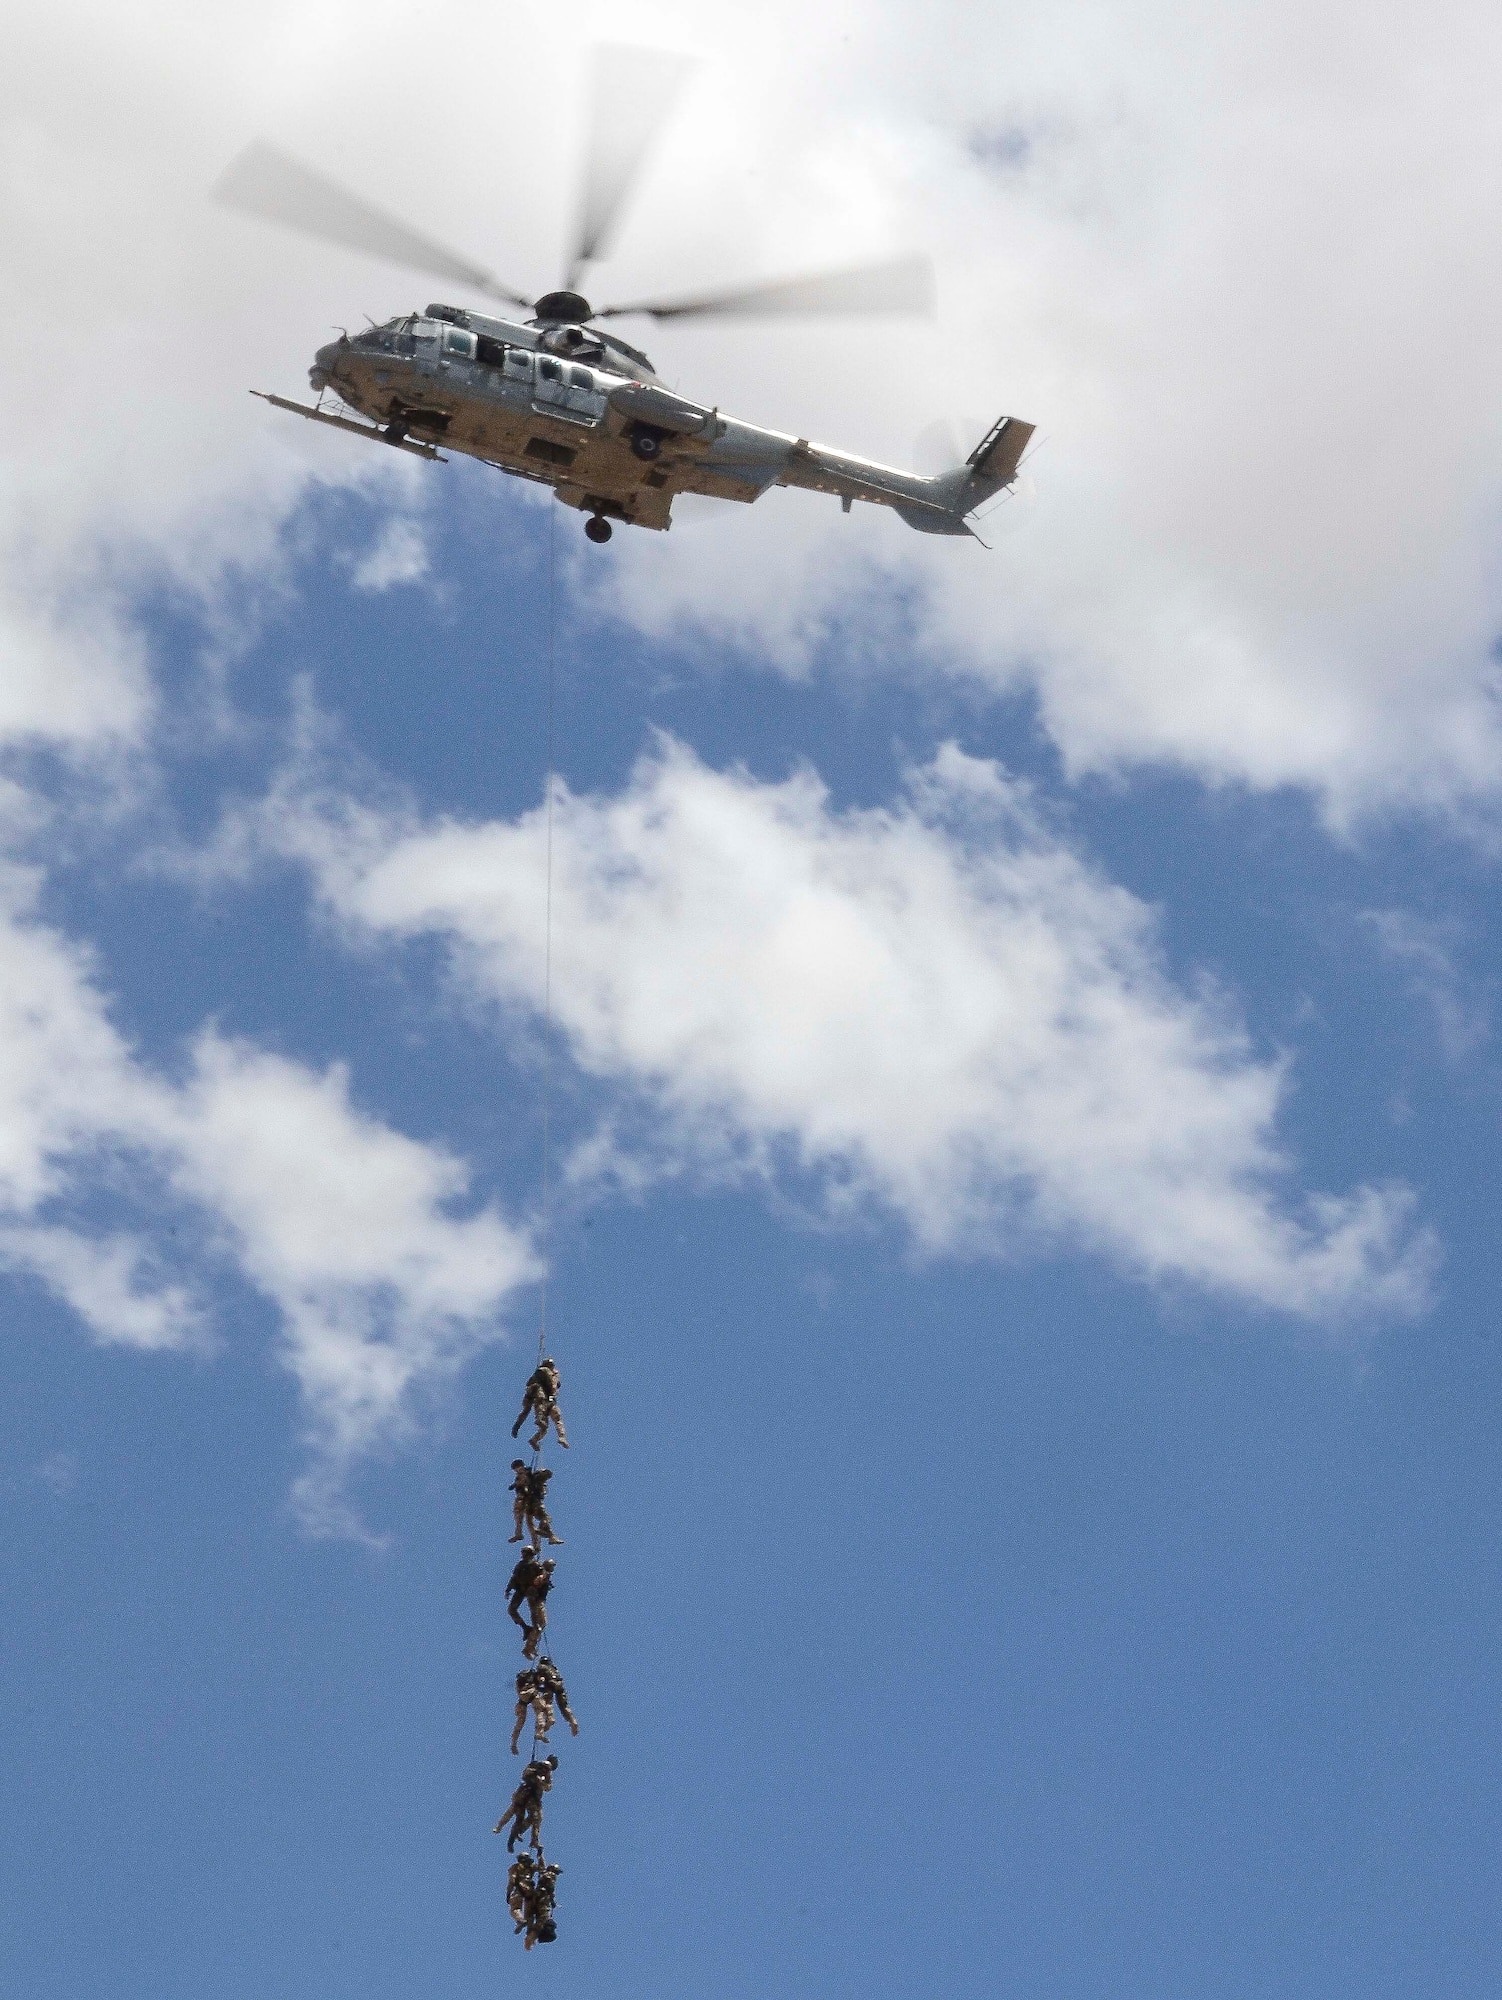 A French Eurocopter EC-735 Caracal ascends with U.S. Army, French and Swedish Special Operations Personnel, while conducting Alternate Insertion Extraction  training during Exercise ANGEL THUNDER May 07, 2014 at Davis-Monthan Air Force Base, Ariz. ANGEL THUNDER 2014 is the largest and most realistic joint service, multinational, interagency combat search and rescue exercise designed to provide training for personnel recovery assets using a variety of scenarios to simulate deployment conditions and contingencies. Personnel recovery forces will train through the full spectrum of personnel recovery capabilities with ground recovery personnel, air assets, Special Forces teams and federal agents. (U.S. Air Force photo by Staff Sgt. Adam Grant/Released)